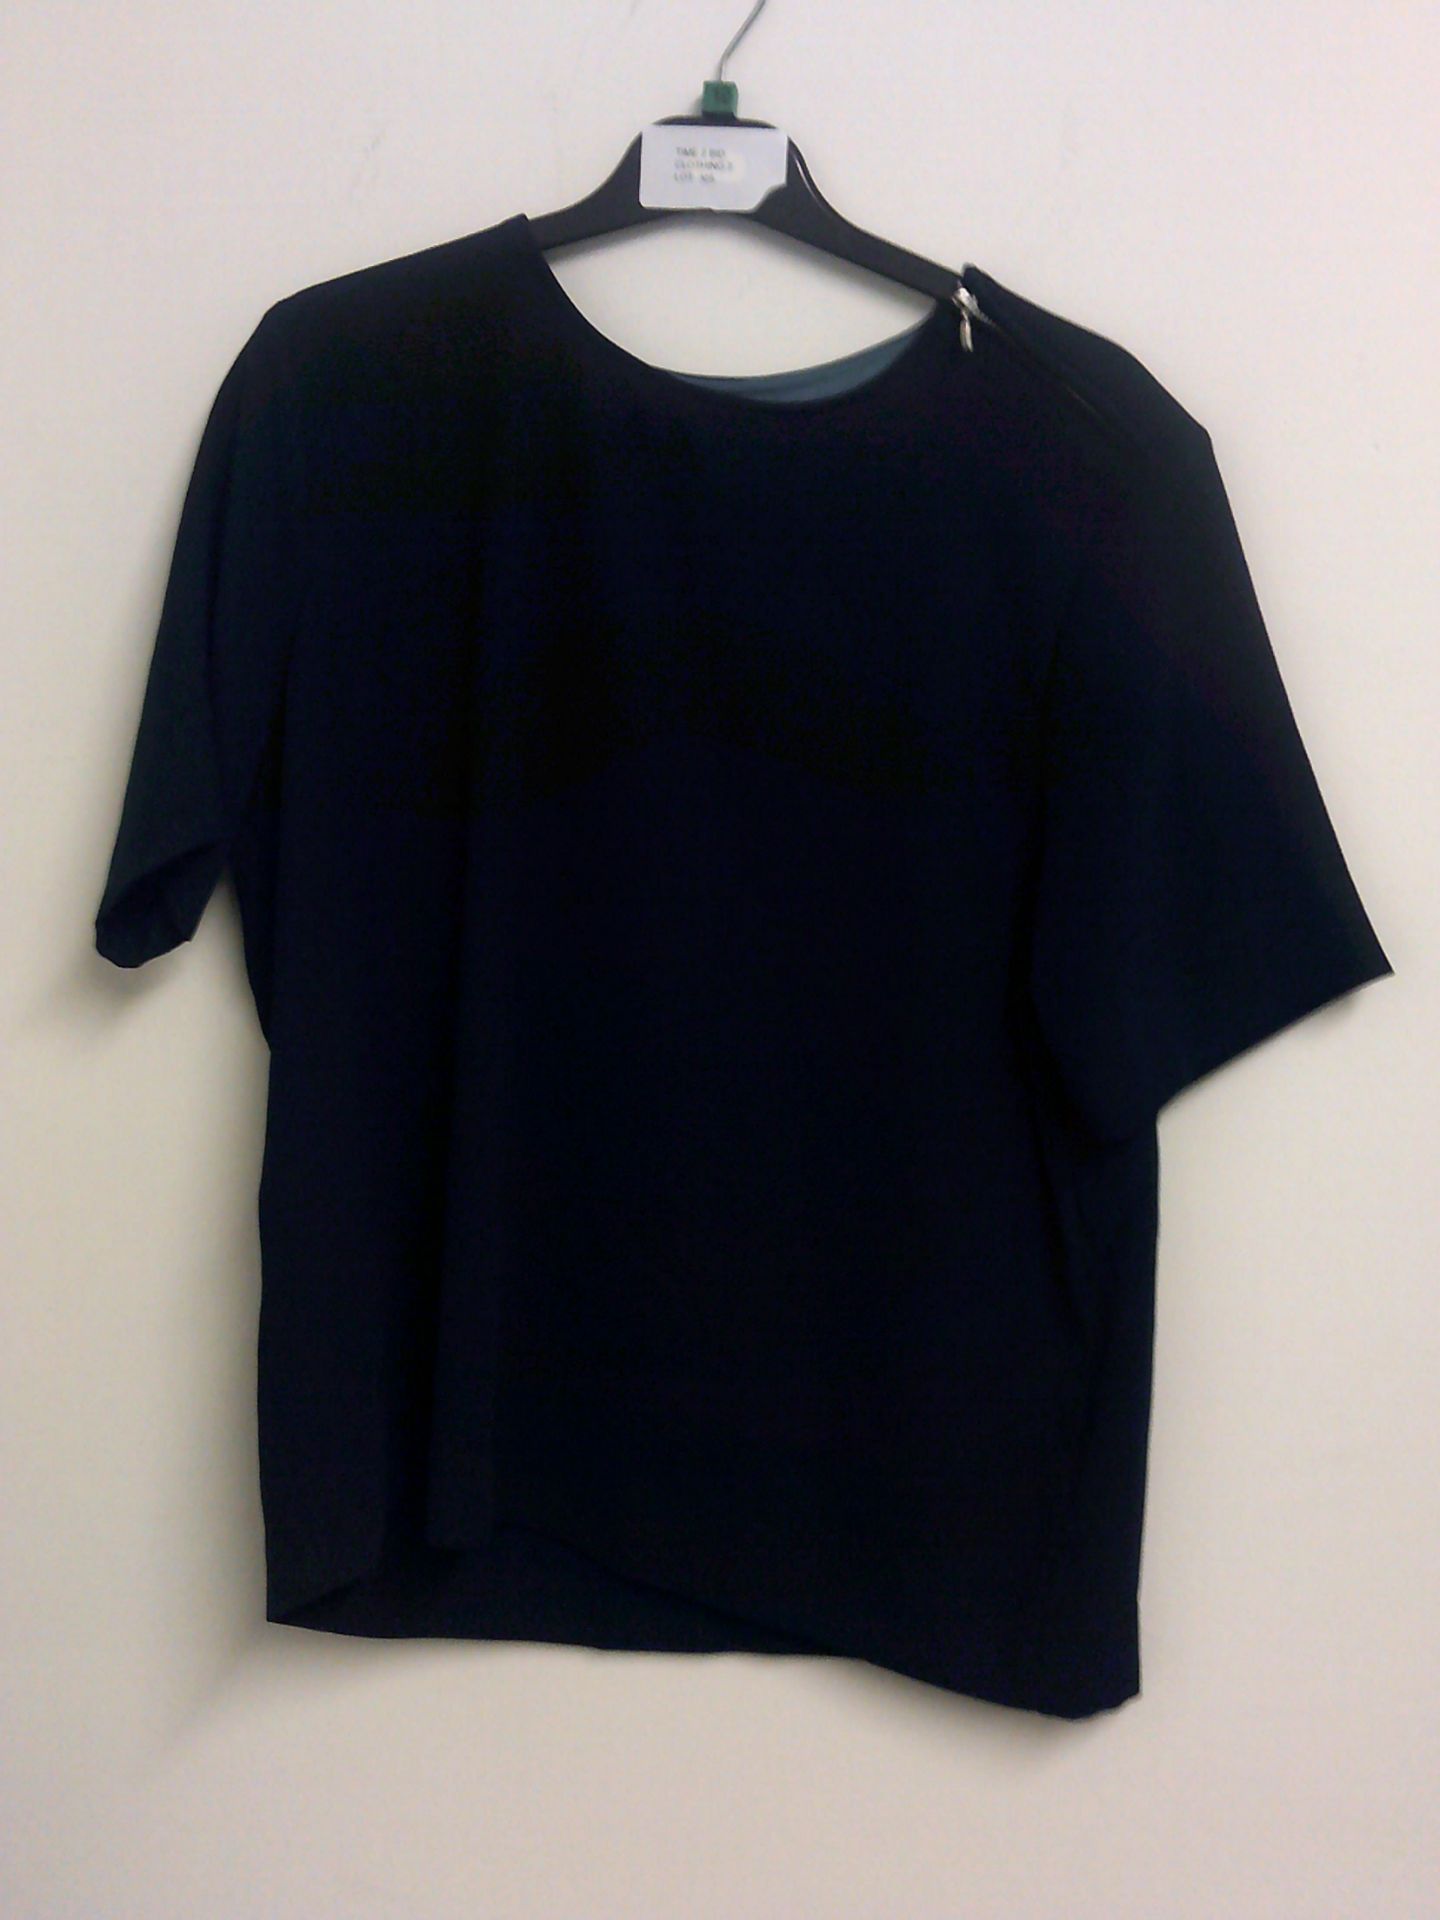 M&S NAVY BLOUSE WITH BACK FEATURE SIZE 12